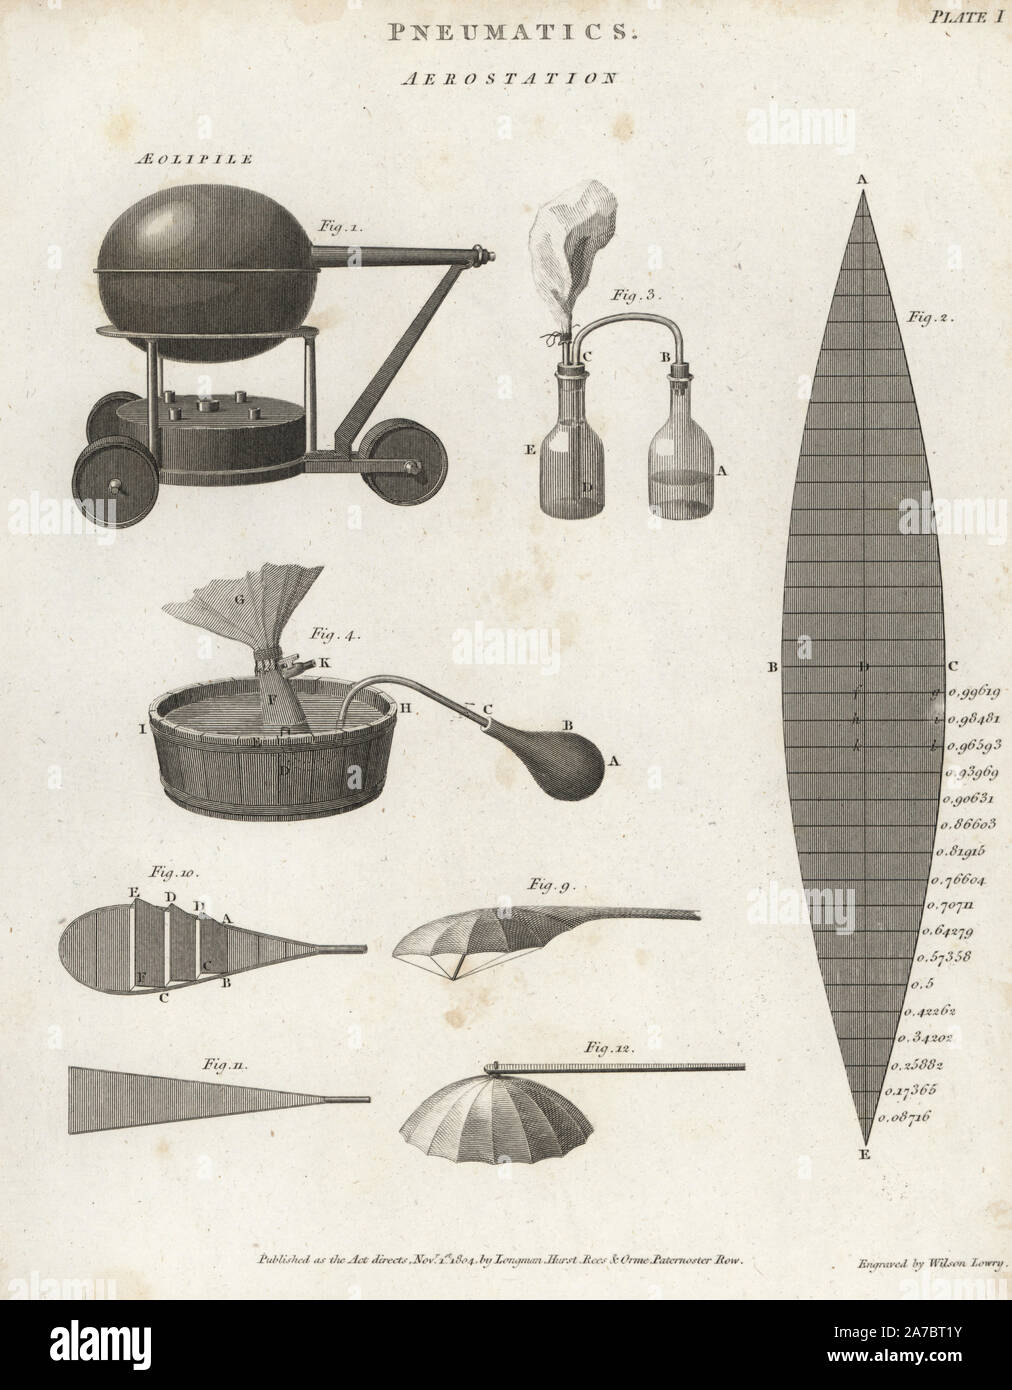 Pneumatics of aerostation, the science of operating lighter-than-air aircraft, including an aeolipile or Hero engine. Copperplate engraving by Wilson Lowry from Abraham Rees' Cyclopedia or Universal Dictionary of Arts, Sciences and Literature, Longman, Hurst, Rees, Orme and Brown, London, 1820. Stock Photo